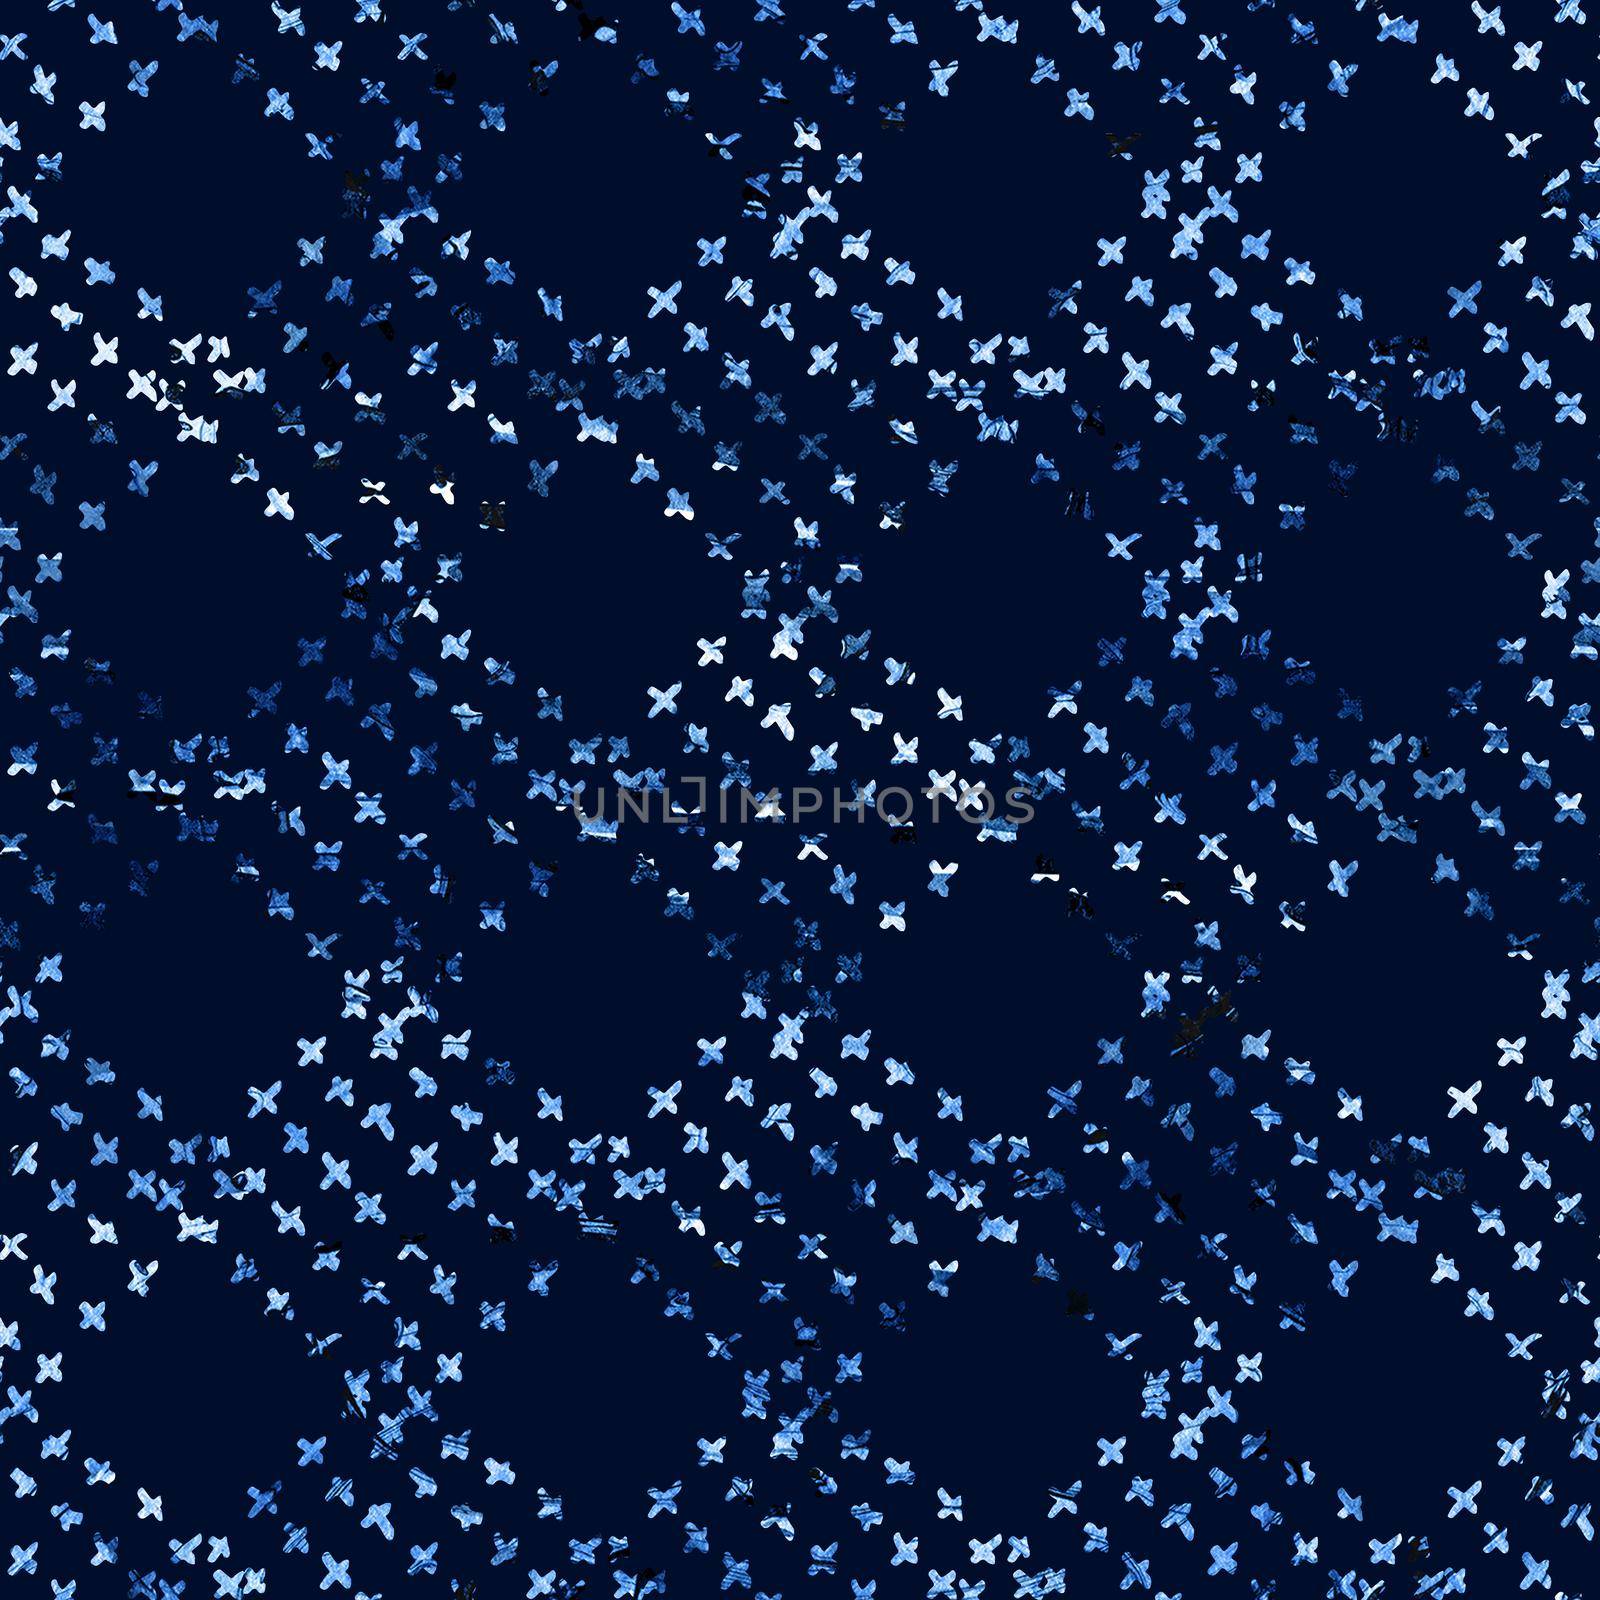 Brush Stroke Plaid Geometric Grung Pattern Seamless in Blue Color Check Background. Gunge Collage Watercolor Texture for Teen and School Kids Fabric Prints Grange Design with lines.